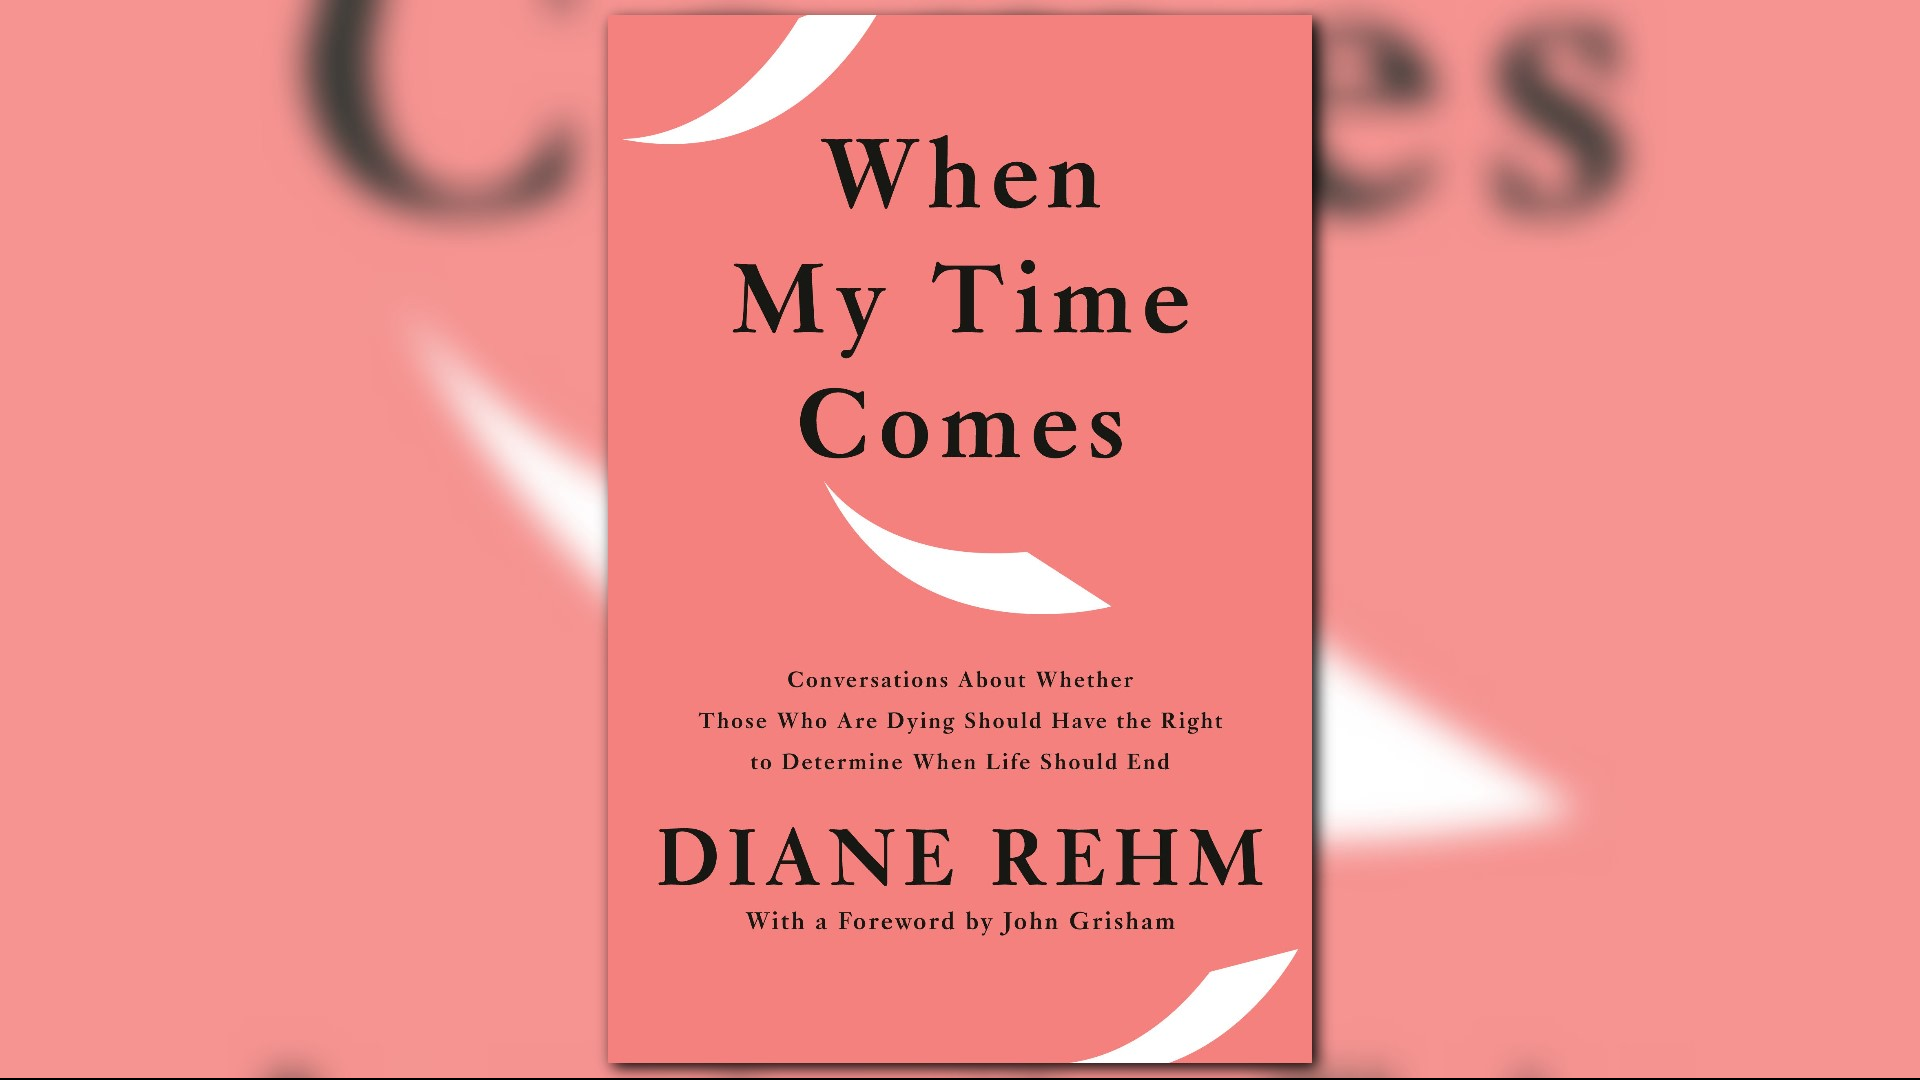 Former NPR host Diane Rehm watched her husband die a slow and painful death, despite their requests to end his life on their terms.